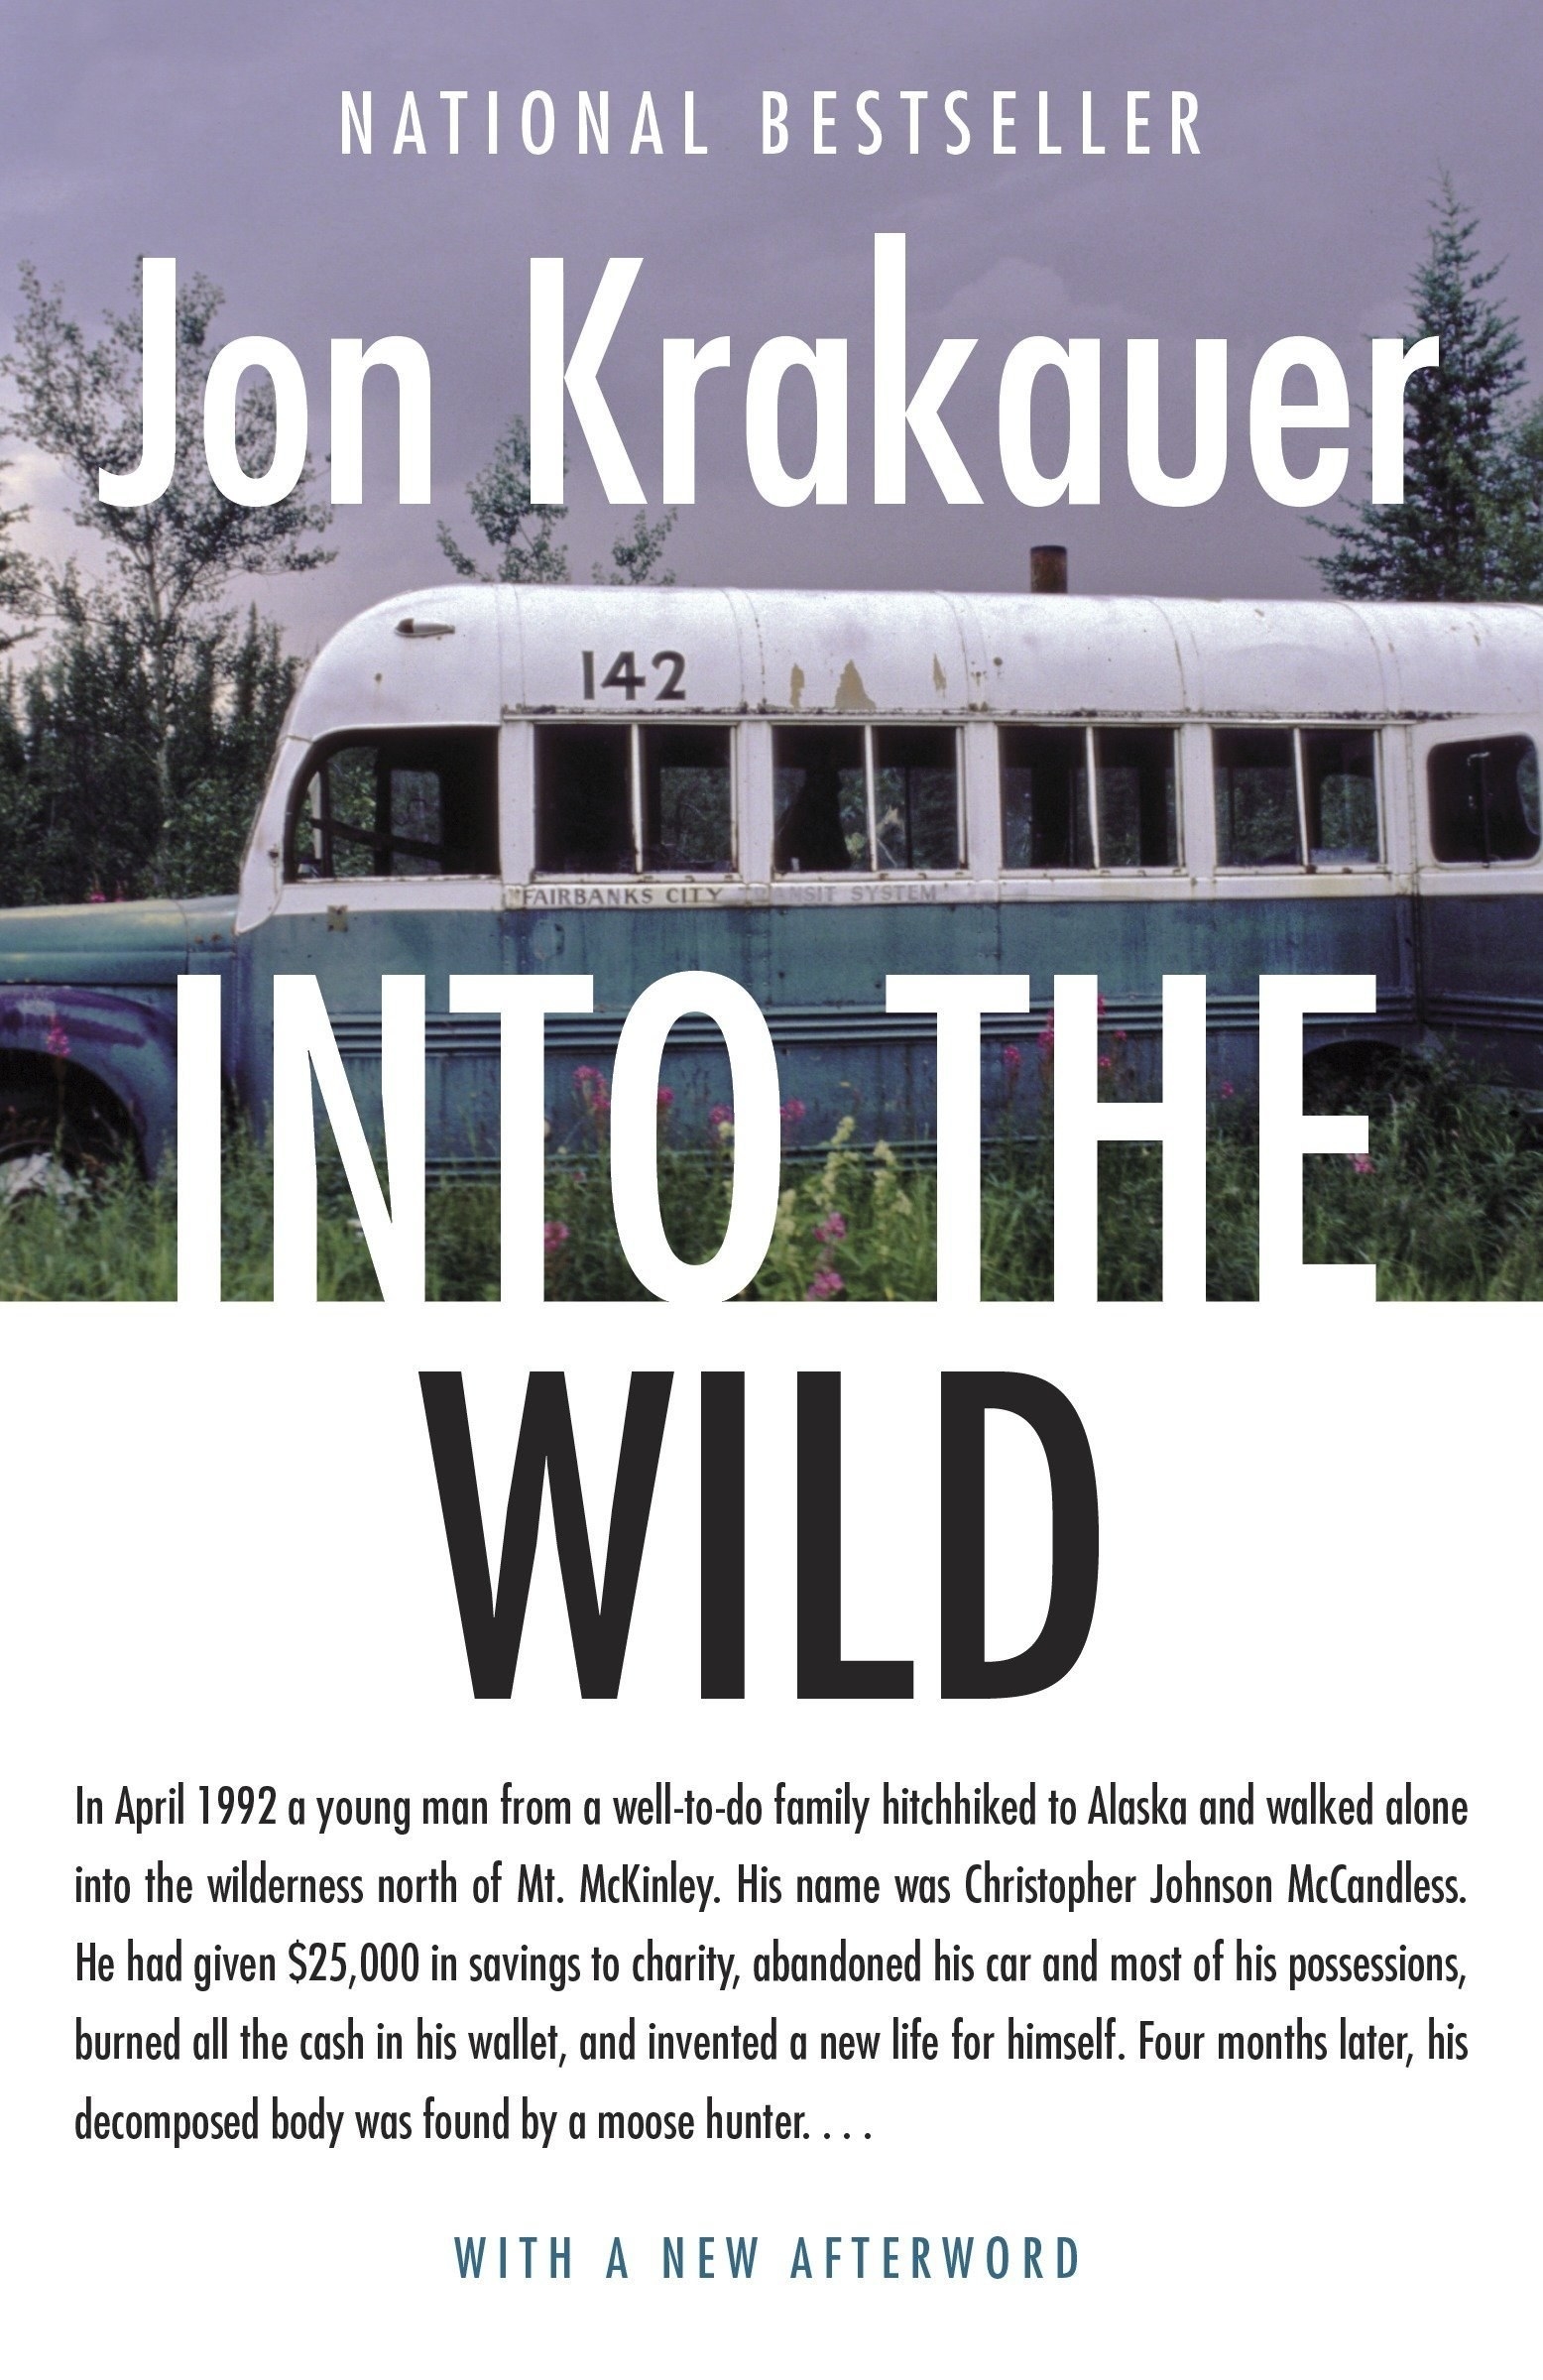 A picture of a well-used bus in the wilderness with a brief synopsis of the novel at the bottom.